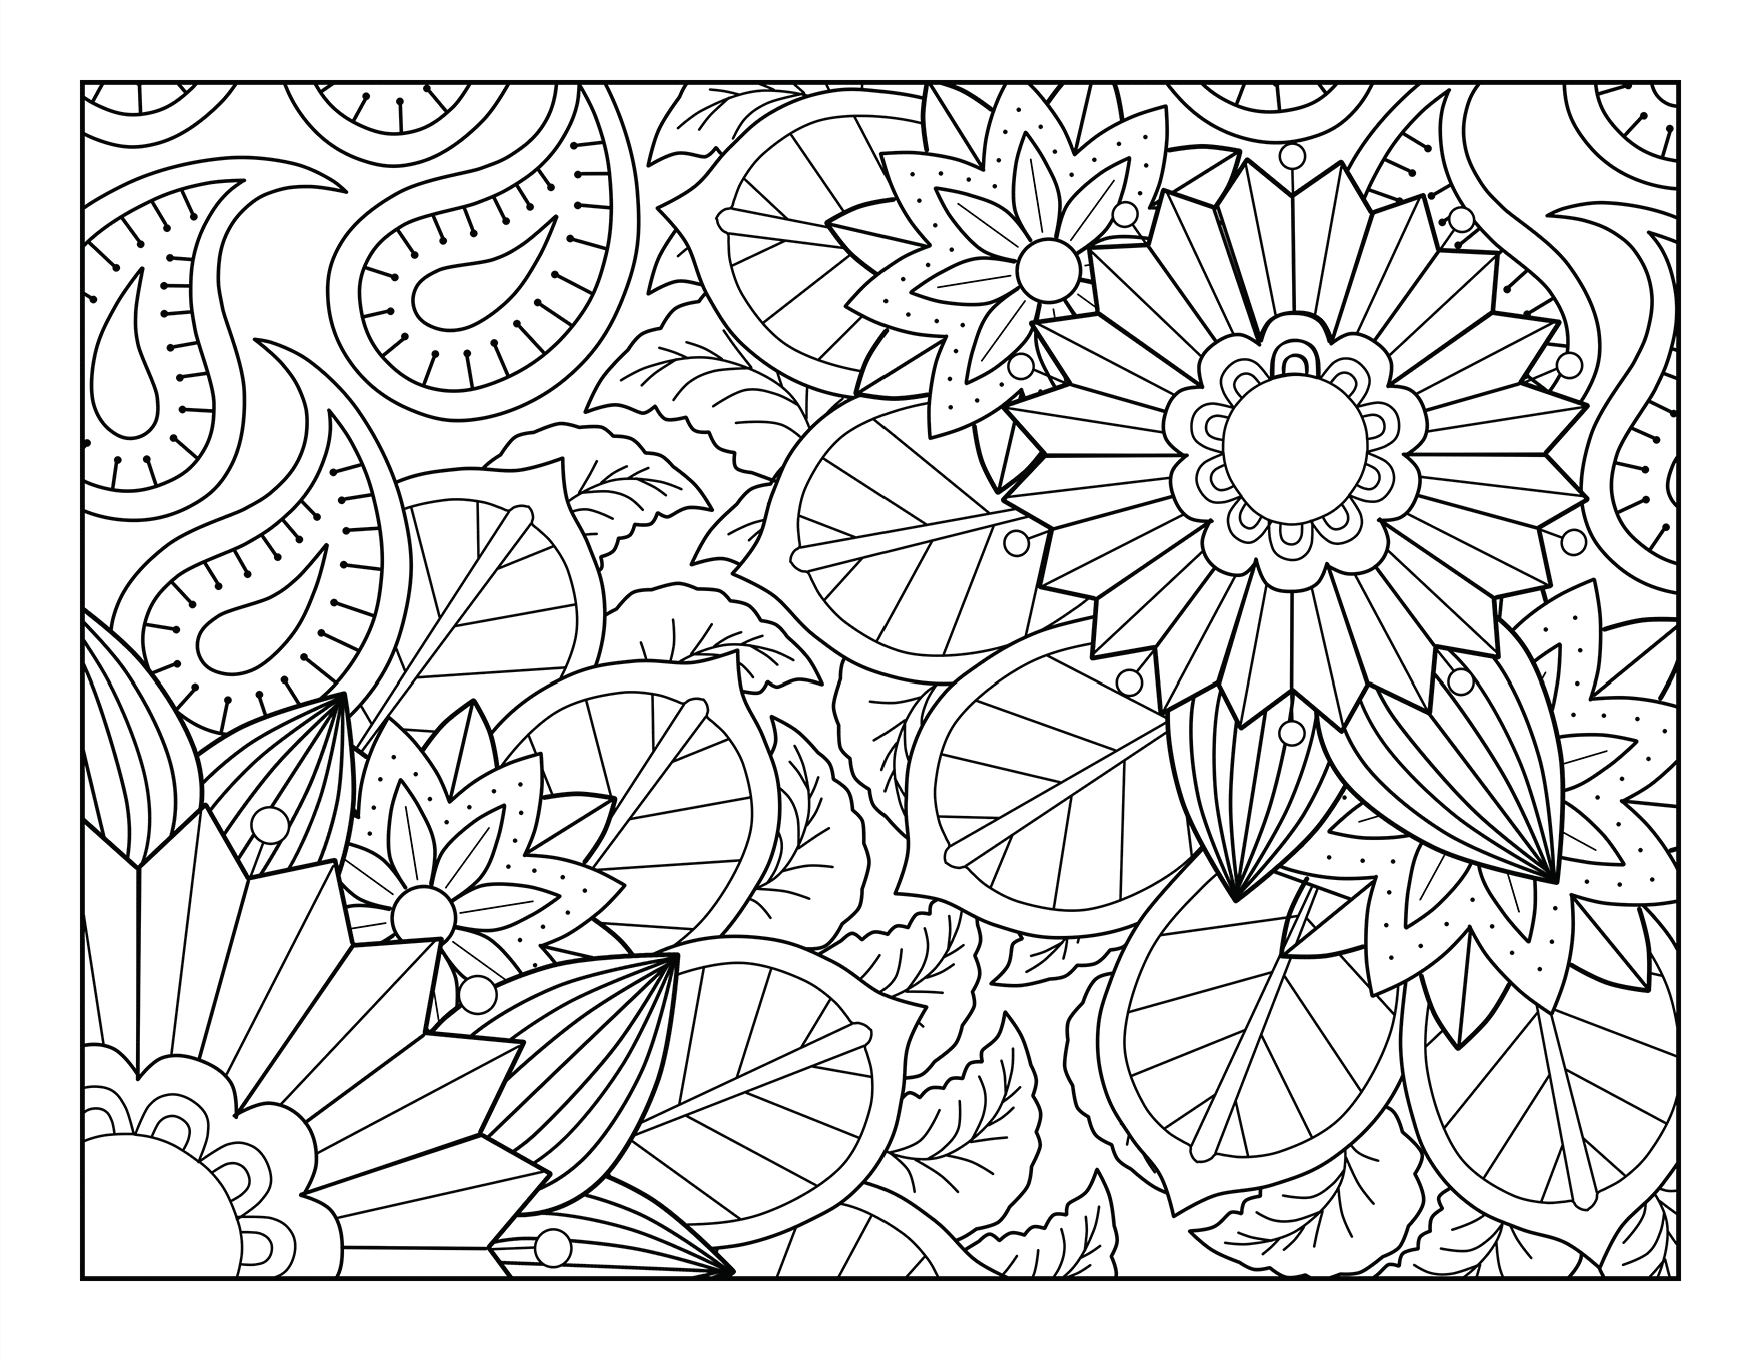 Mental Health Coloring Pages, Anxiety Coloring Pages, Anti-stress